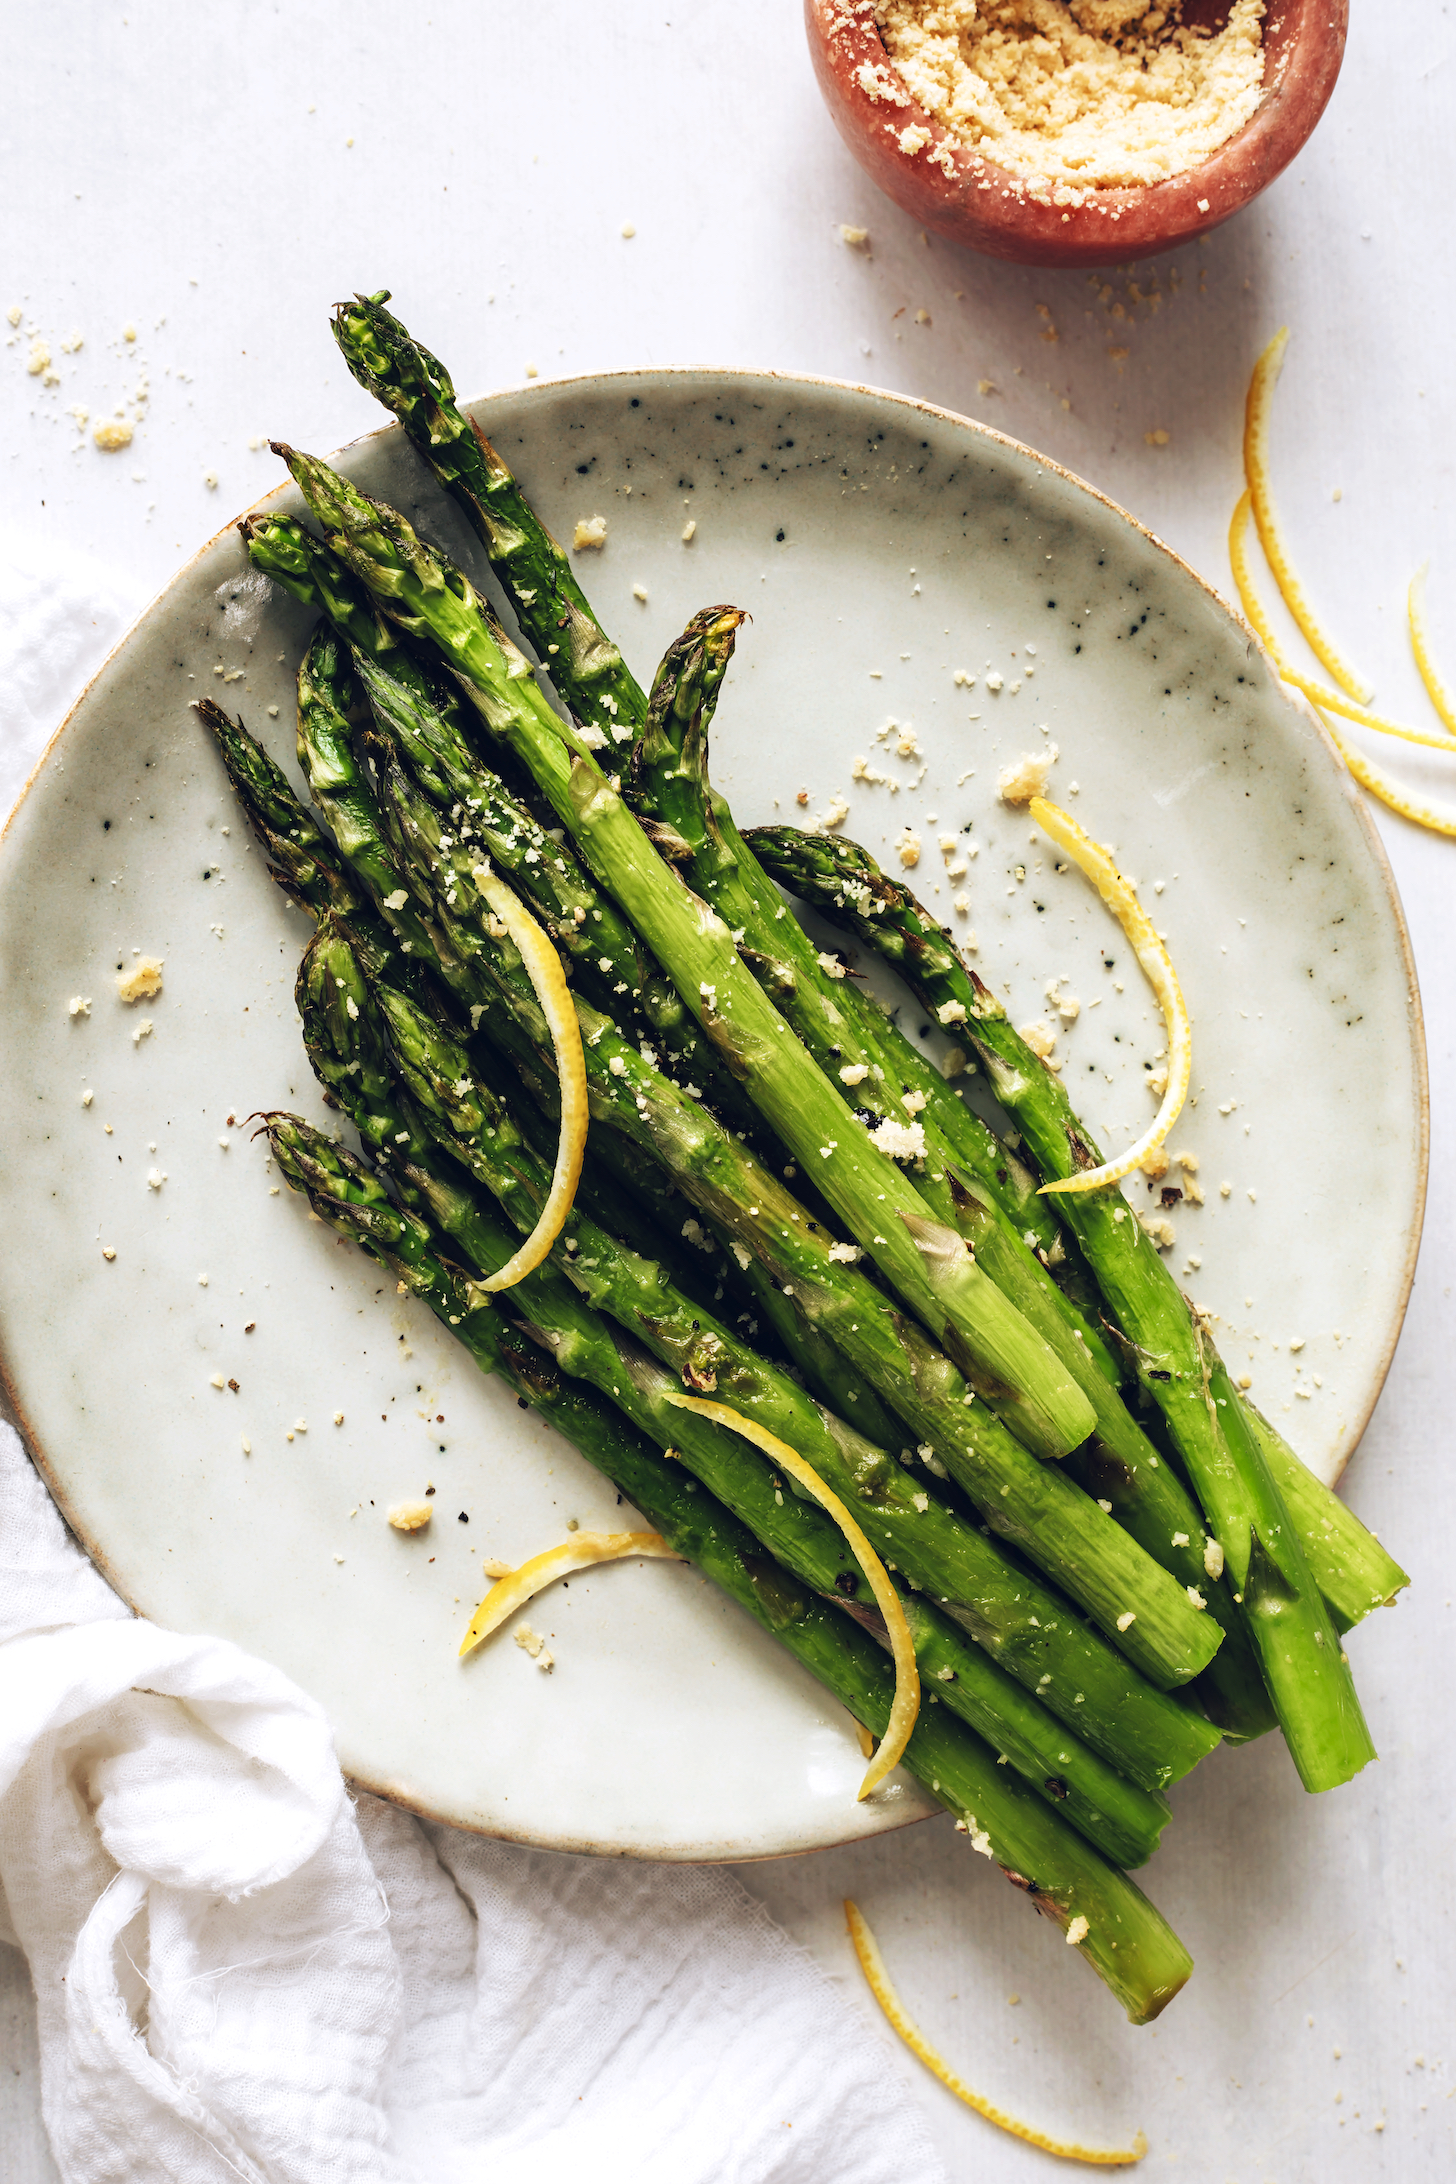 Plate of roasted asparagus with vegan parmesan cheese and lemon